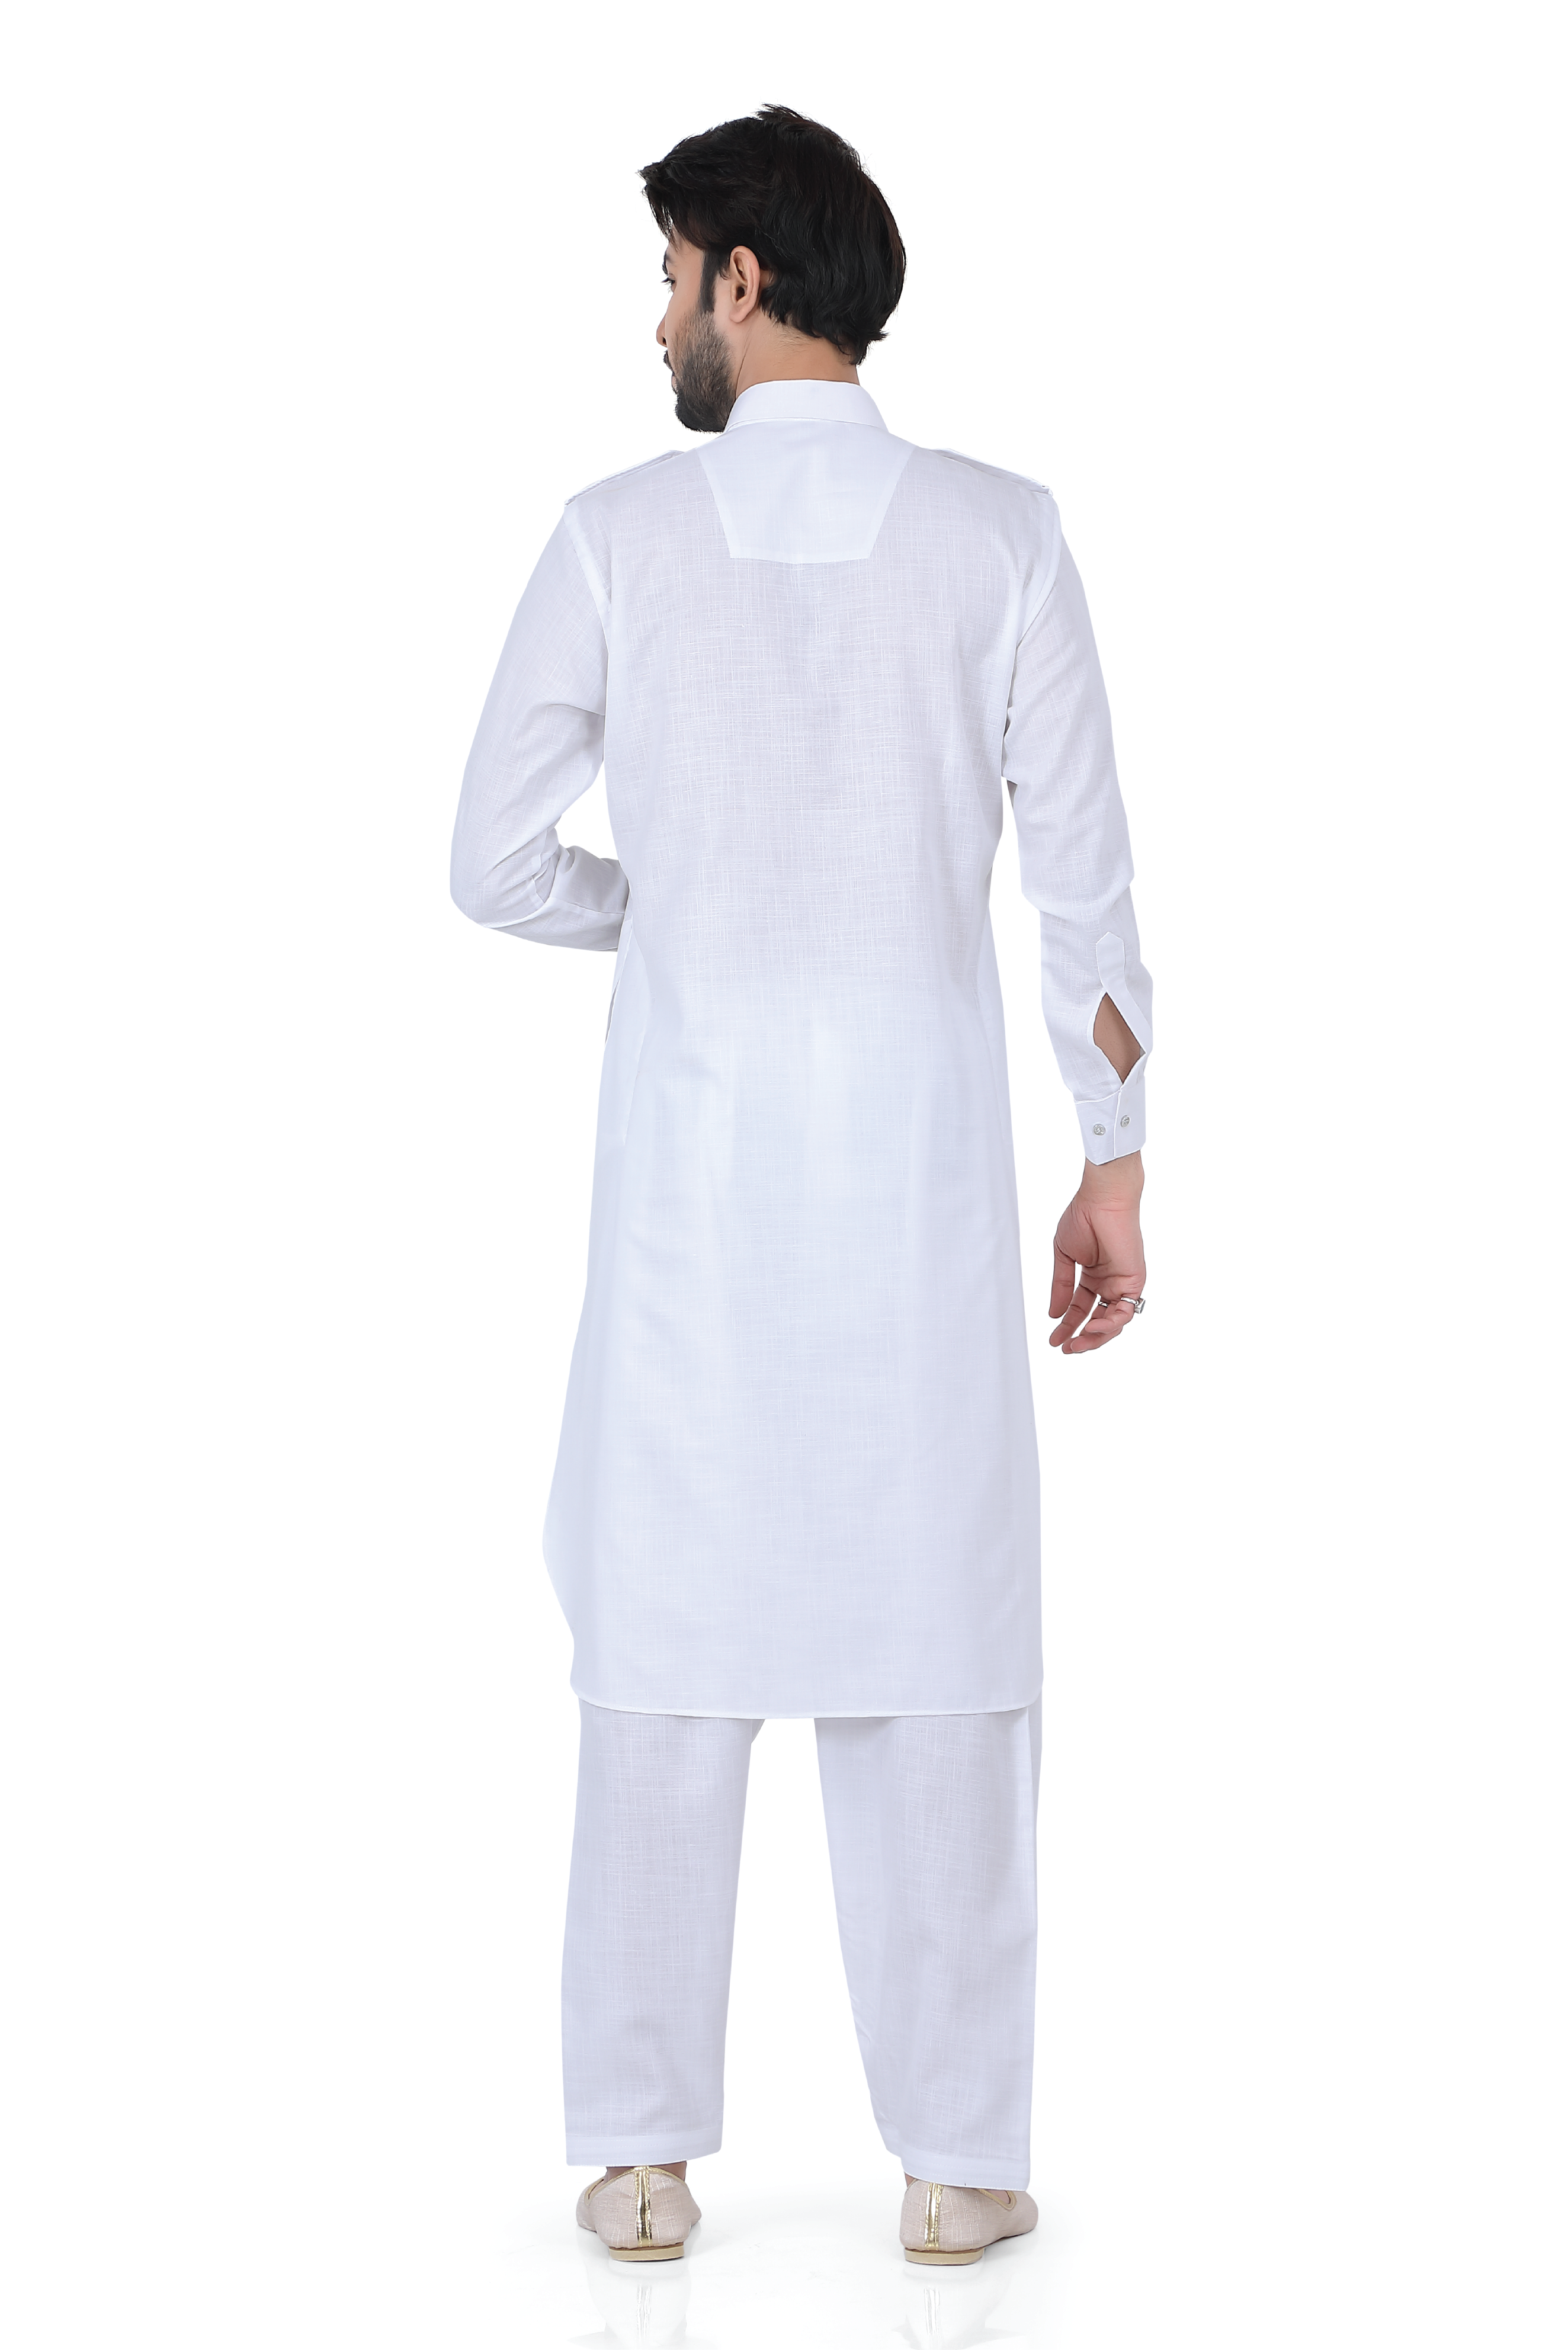 Readymade Cotton Pathani Suit in White Color - 11850